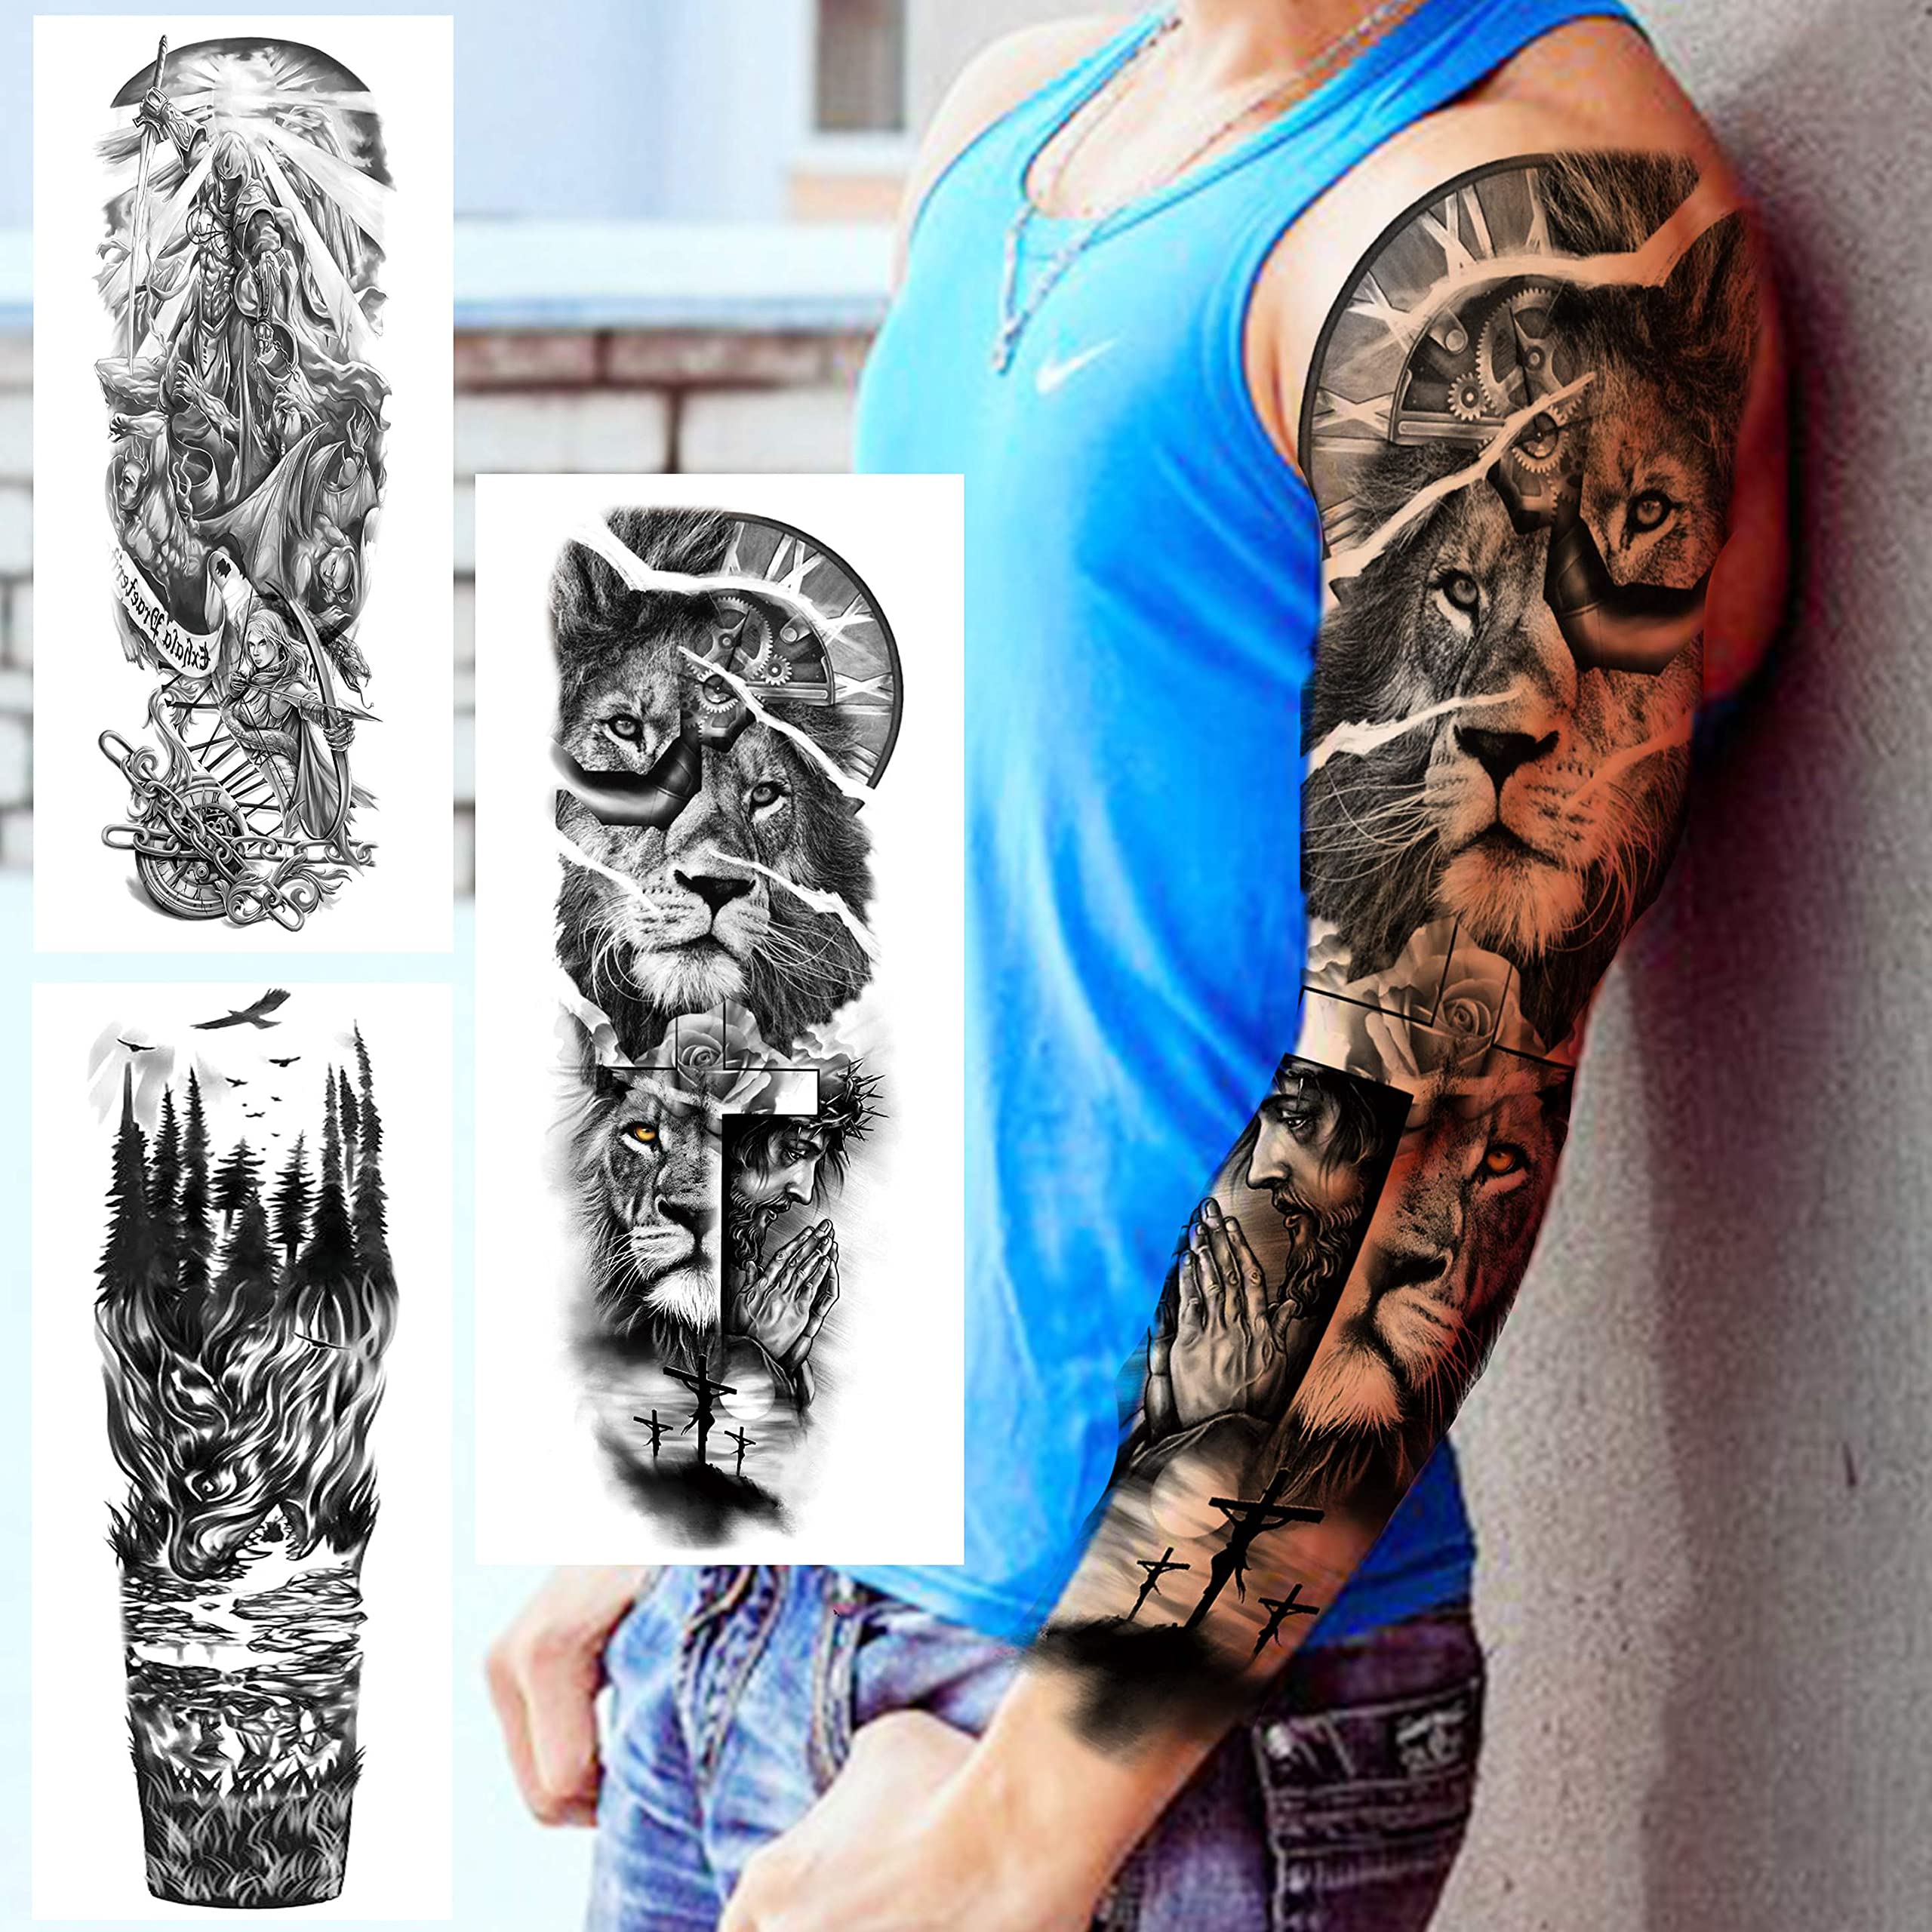 VANTATY 20 Sheets Extra Large Full Arm Temporary Tattoos For Men Adults, Tiger Snake Leopard Lion King Temporary Tattoos Sleeve For Women, Temp Waterproof Fake Tattoo Stickers For Kids Warrior Tatoos